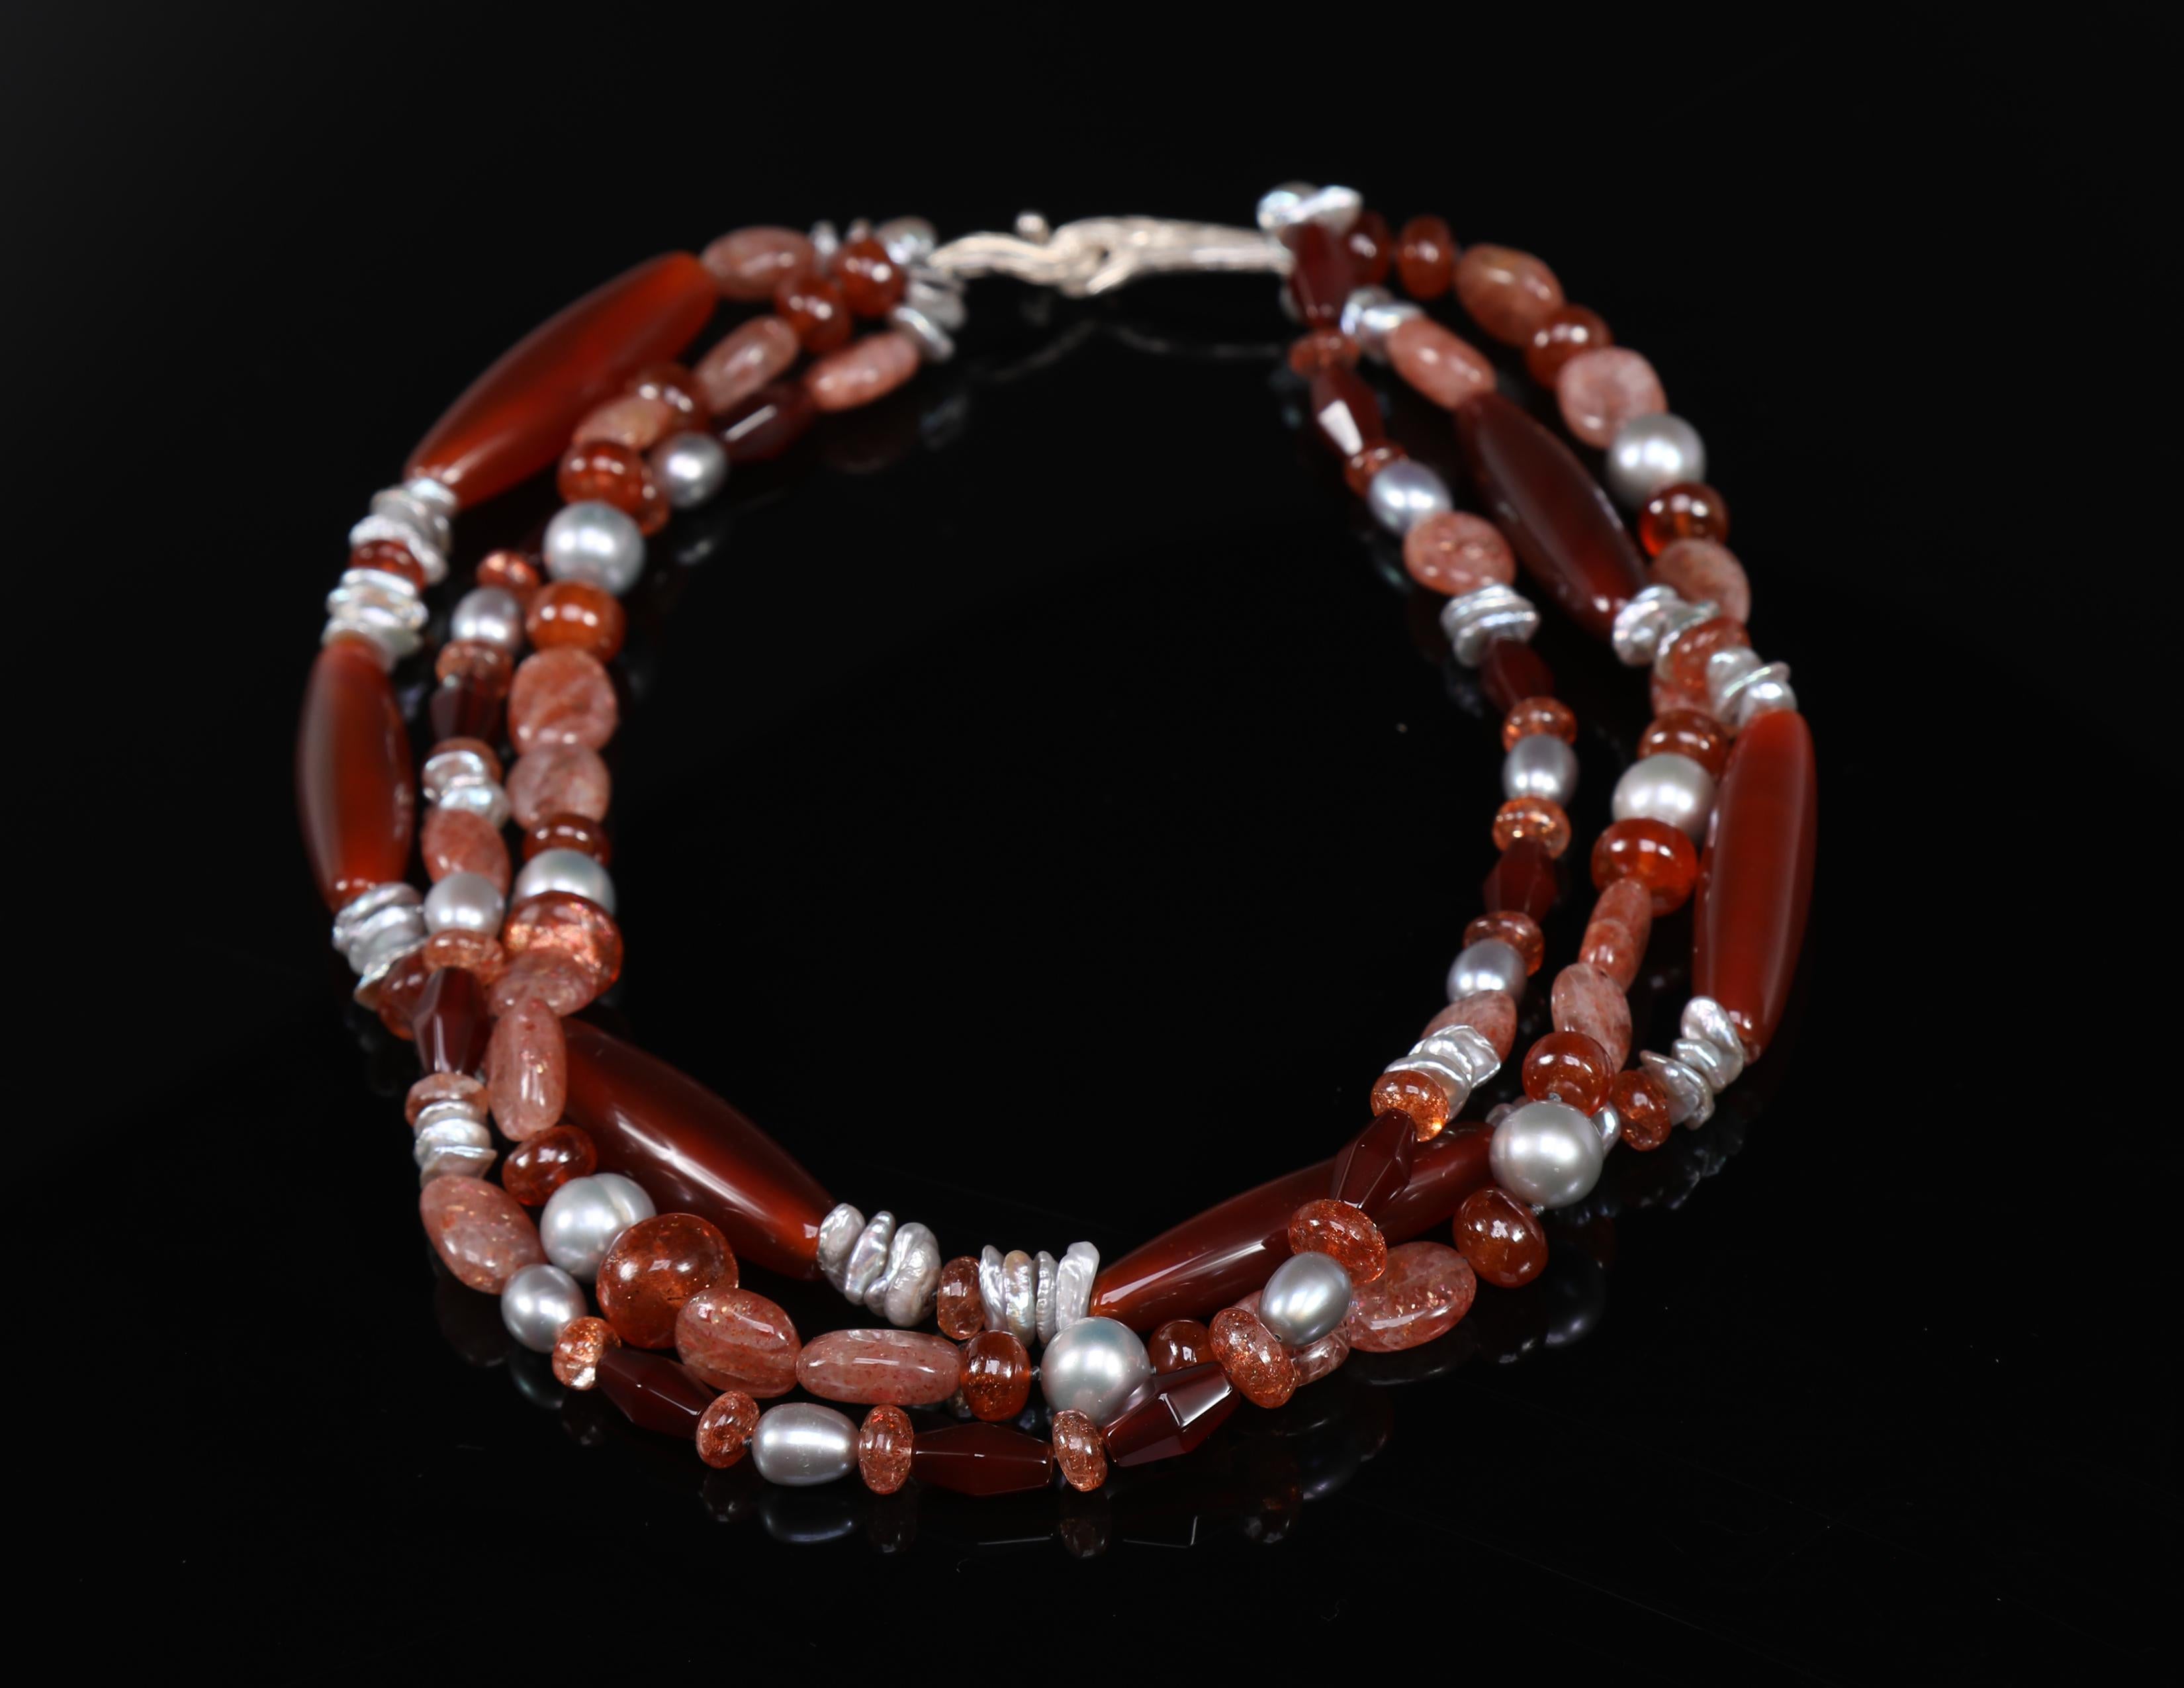 This multi-strand necklace of carnelian, sunstone, pearl, and silver brings to mind a question raised by a wonderful customer.  